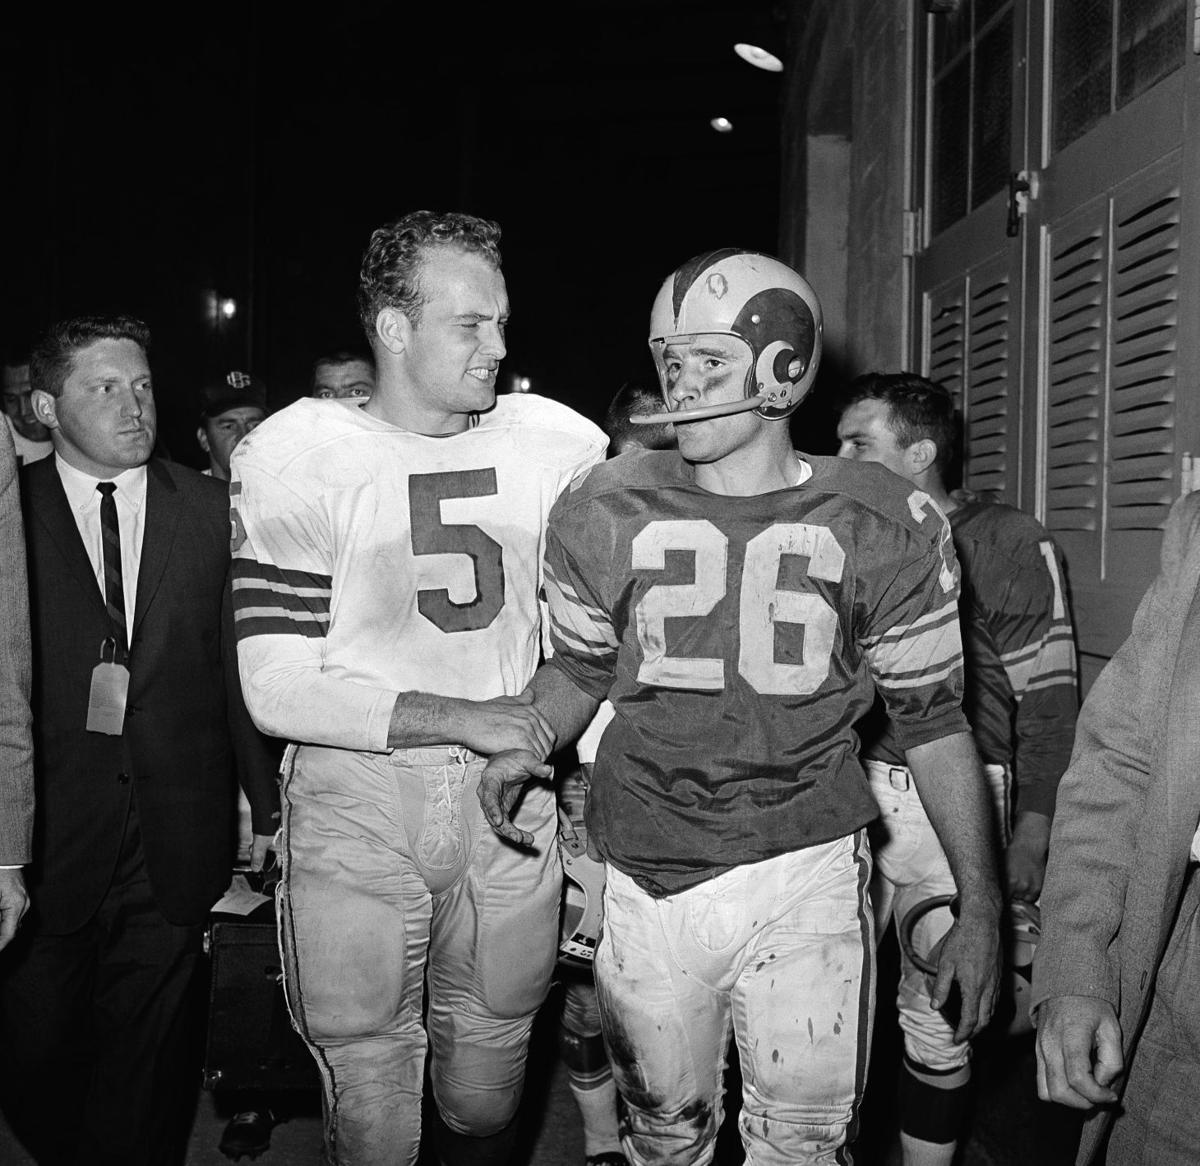 Lombardi legend: Packers Hall of Famer Paul Hornung dies at 84